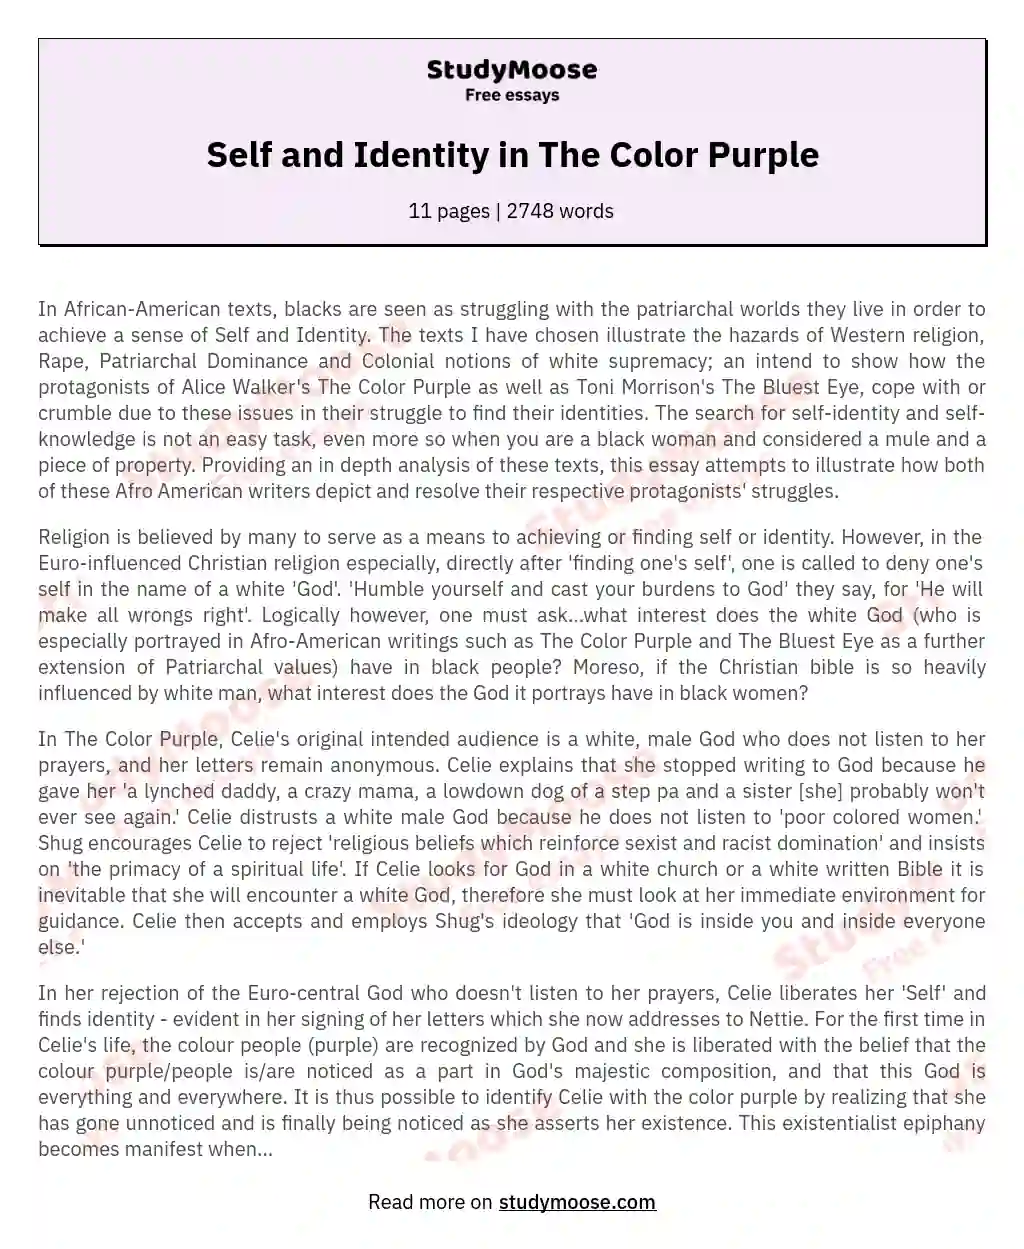 Self and Identity in The Color Purple